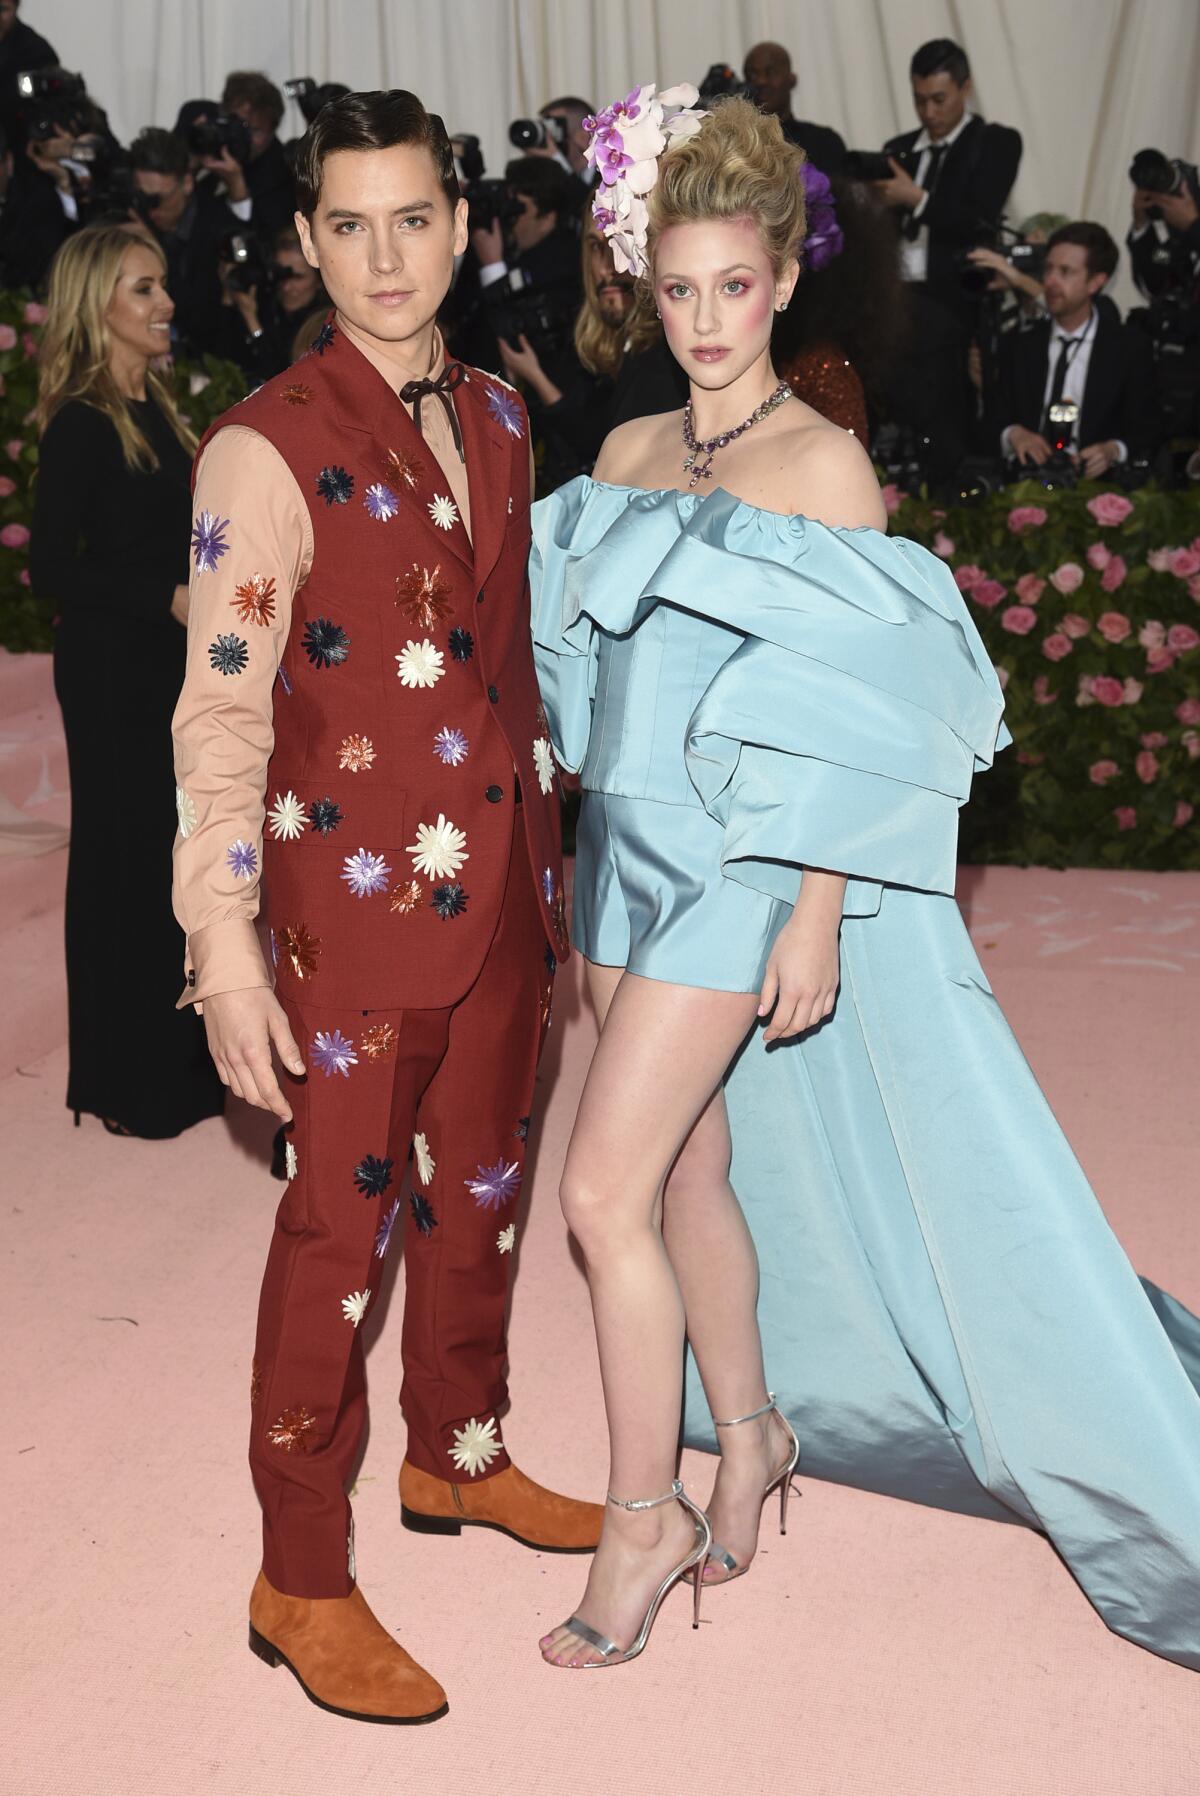 Cole Sprouse and Lili Reinhart walk the red carpet together at the 2019 Met Gala.